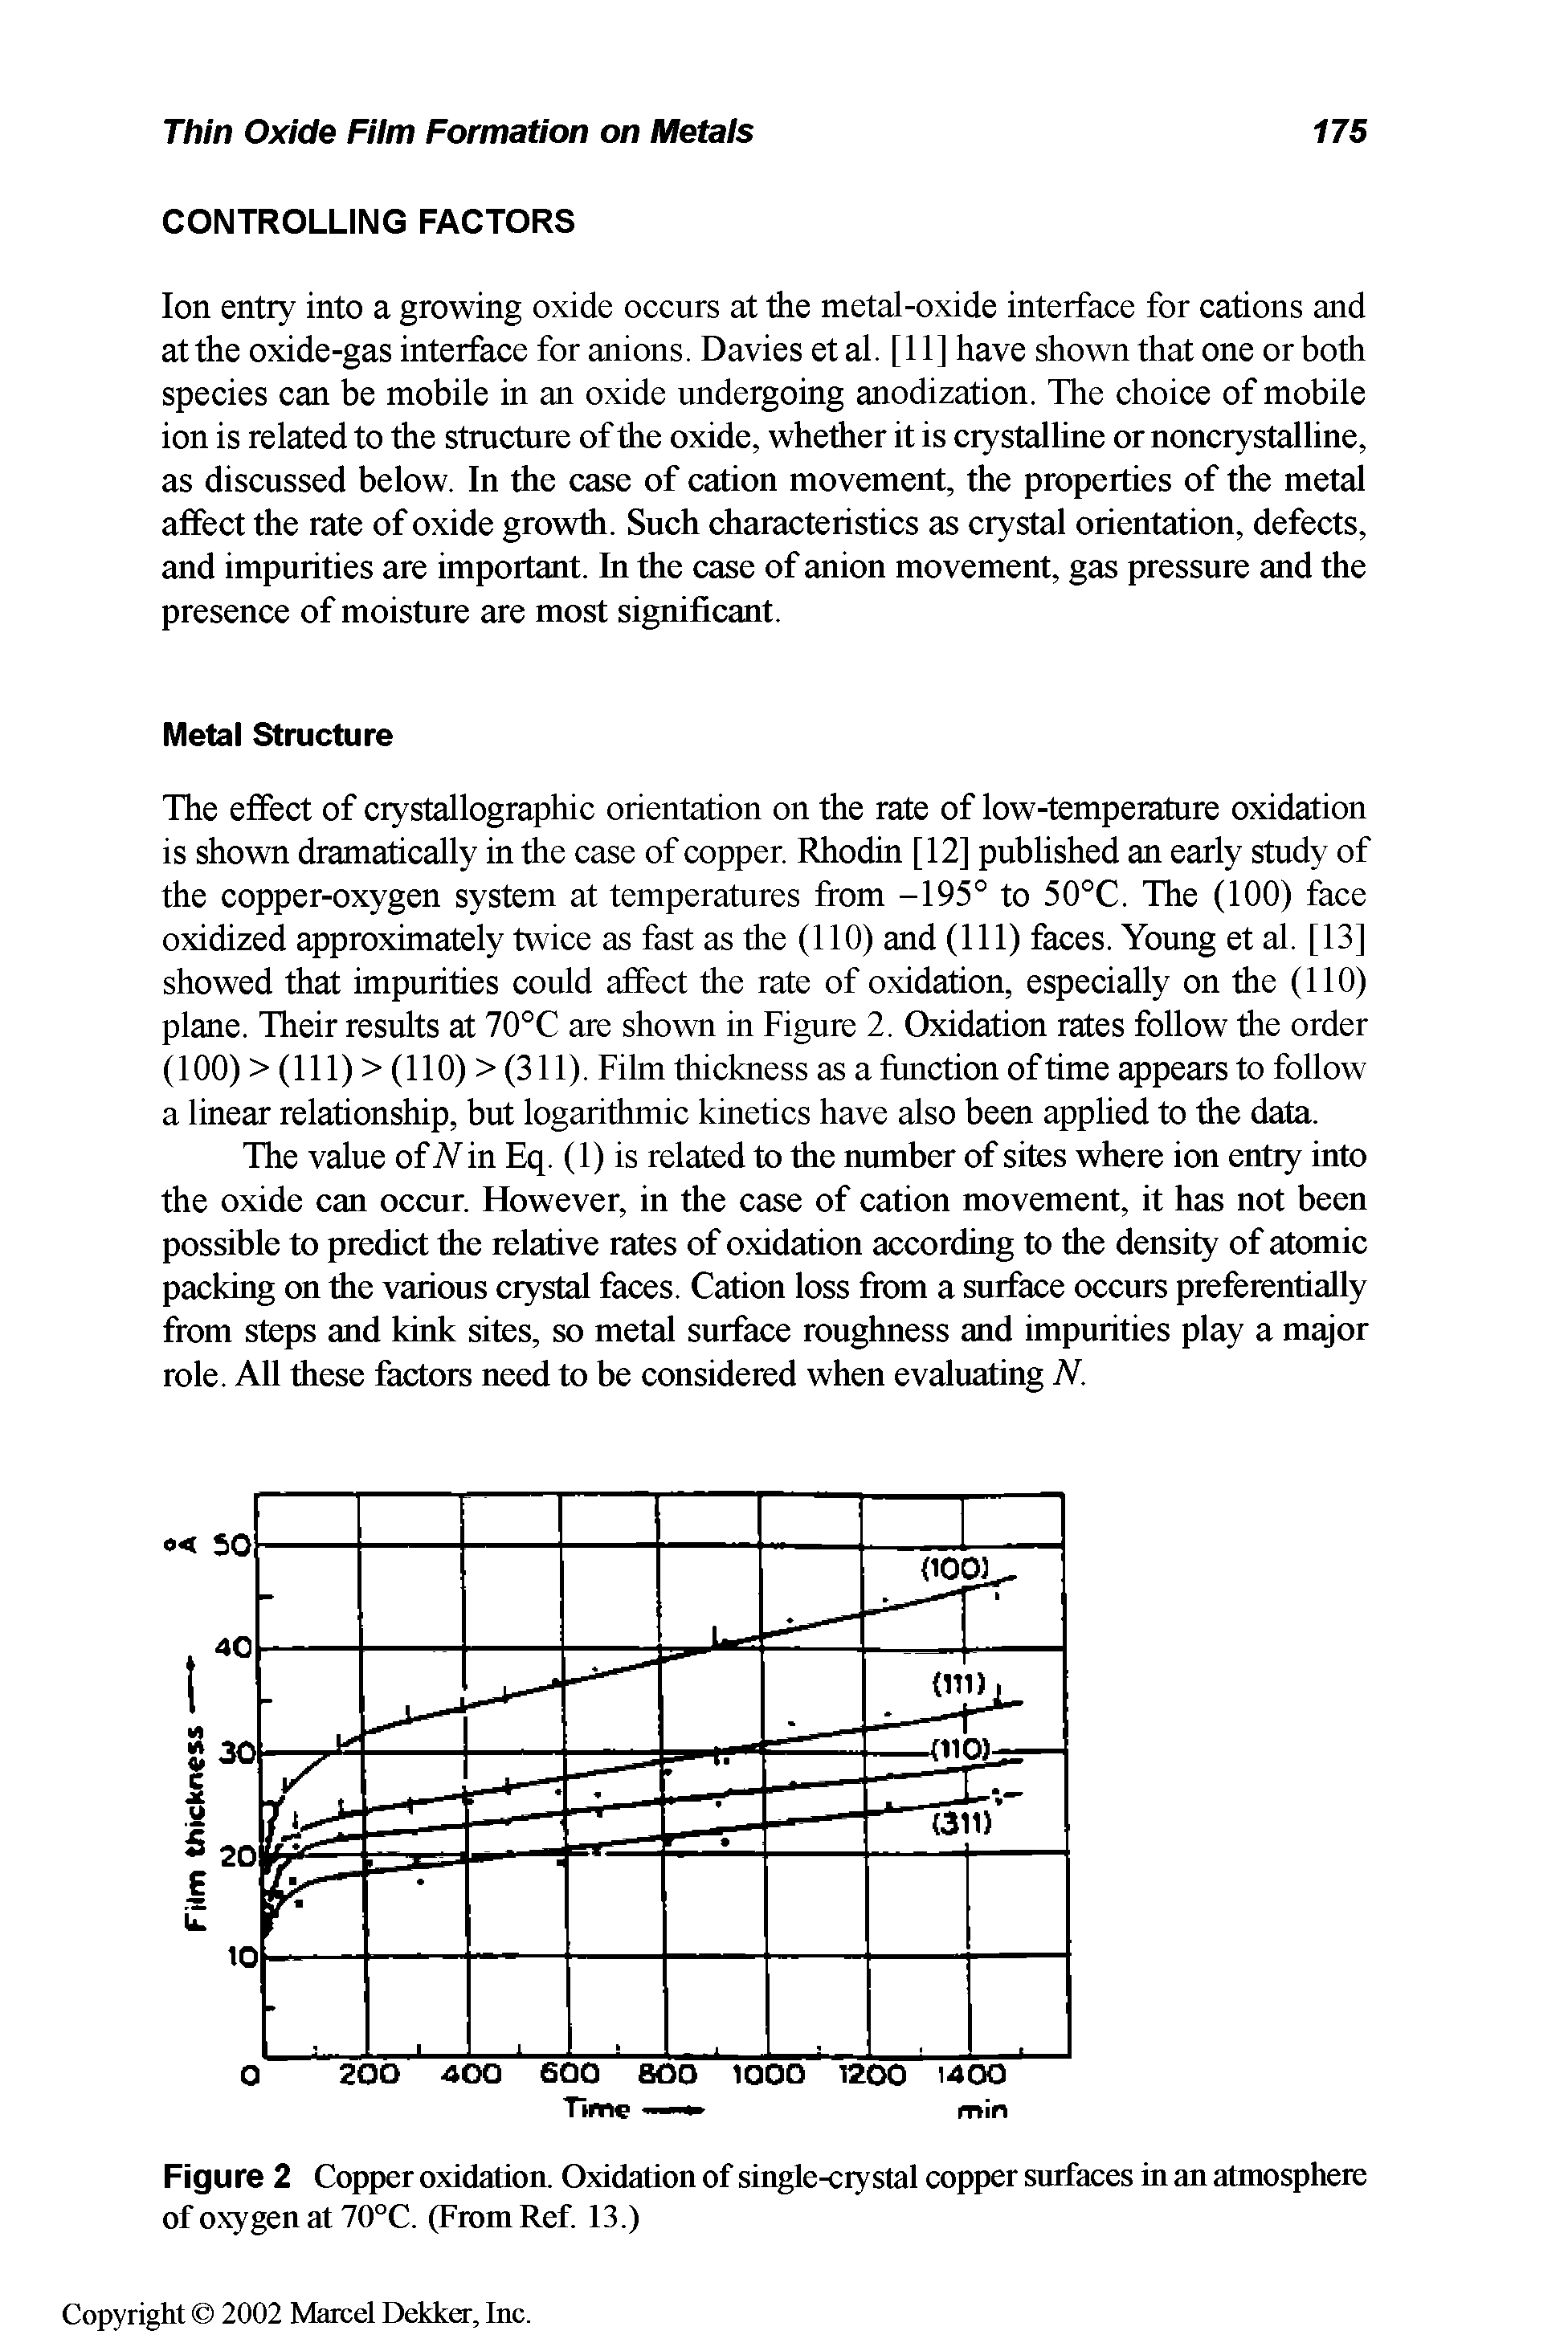 Figure 2 Copper oxidation. Oxidation of single-crystal copper surfaces in an atmosphere of oxygen at 70°C. (From Ref. 13.)...